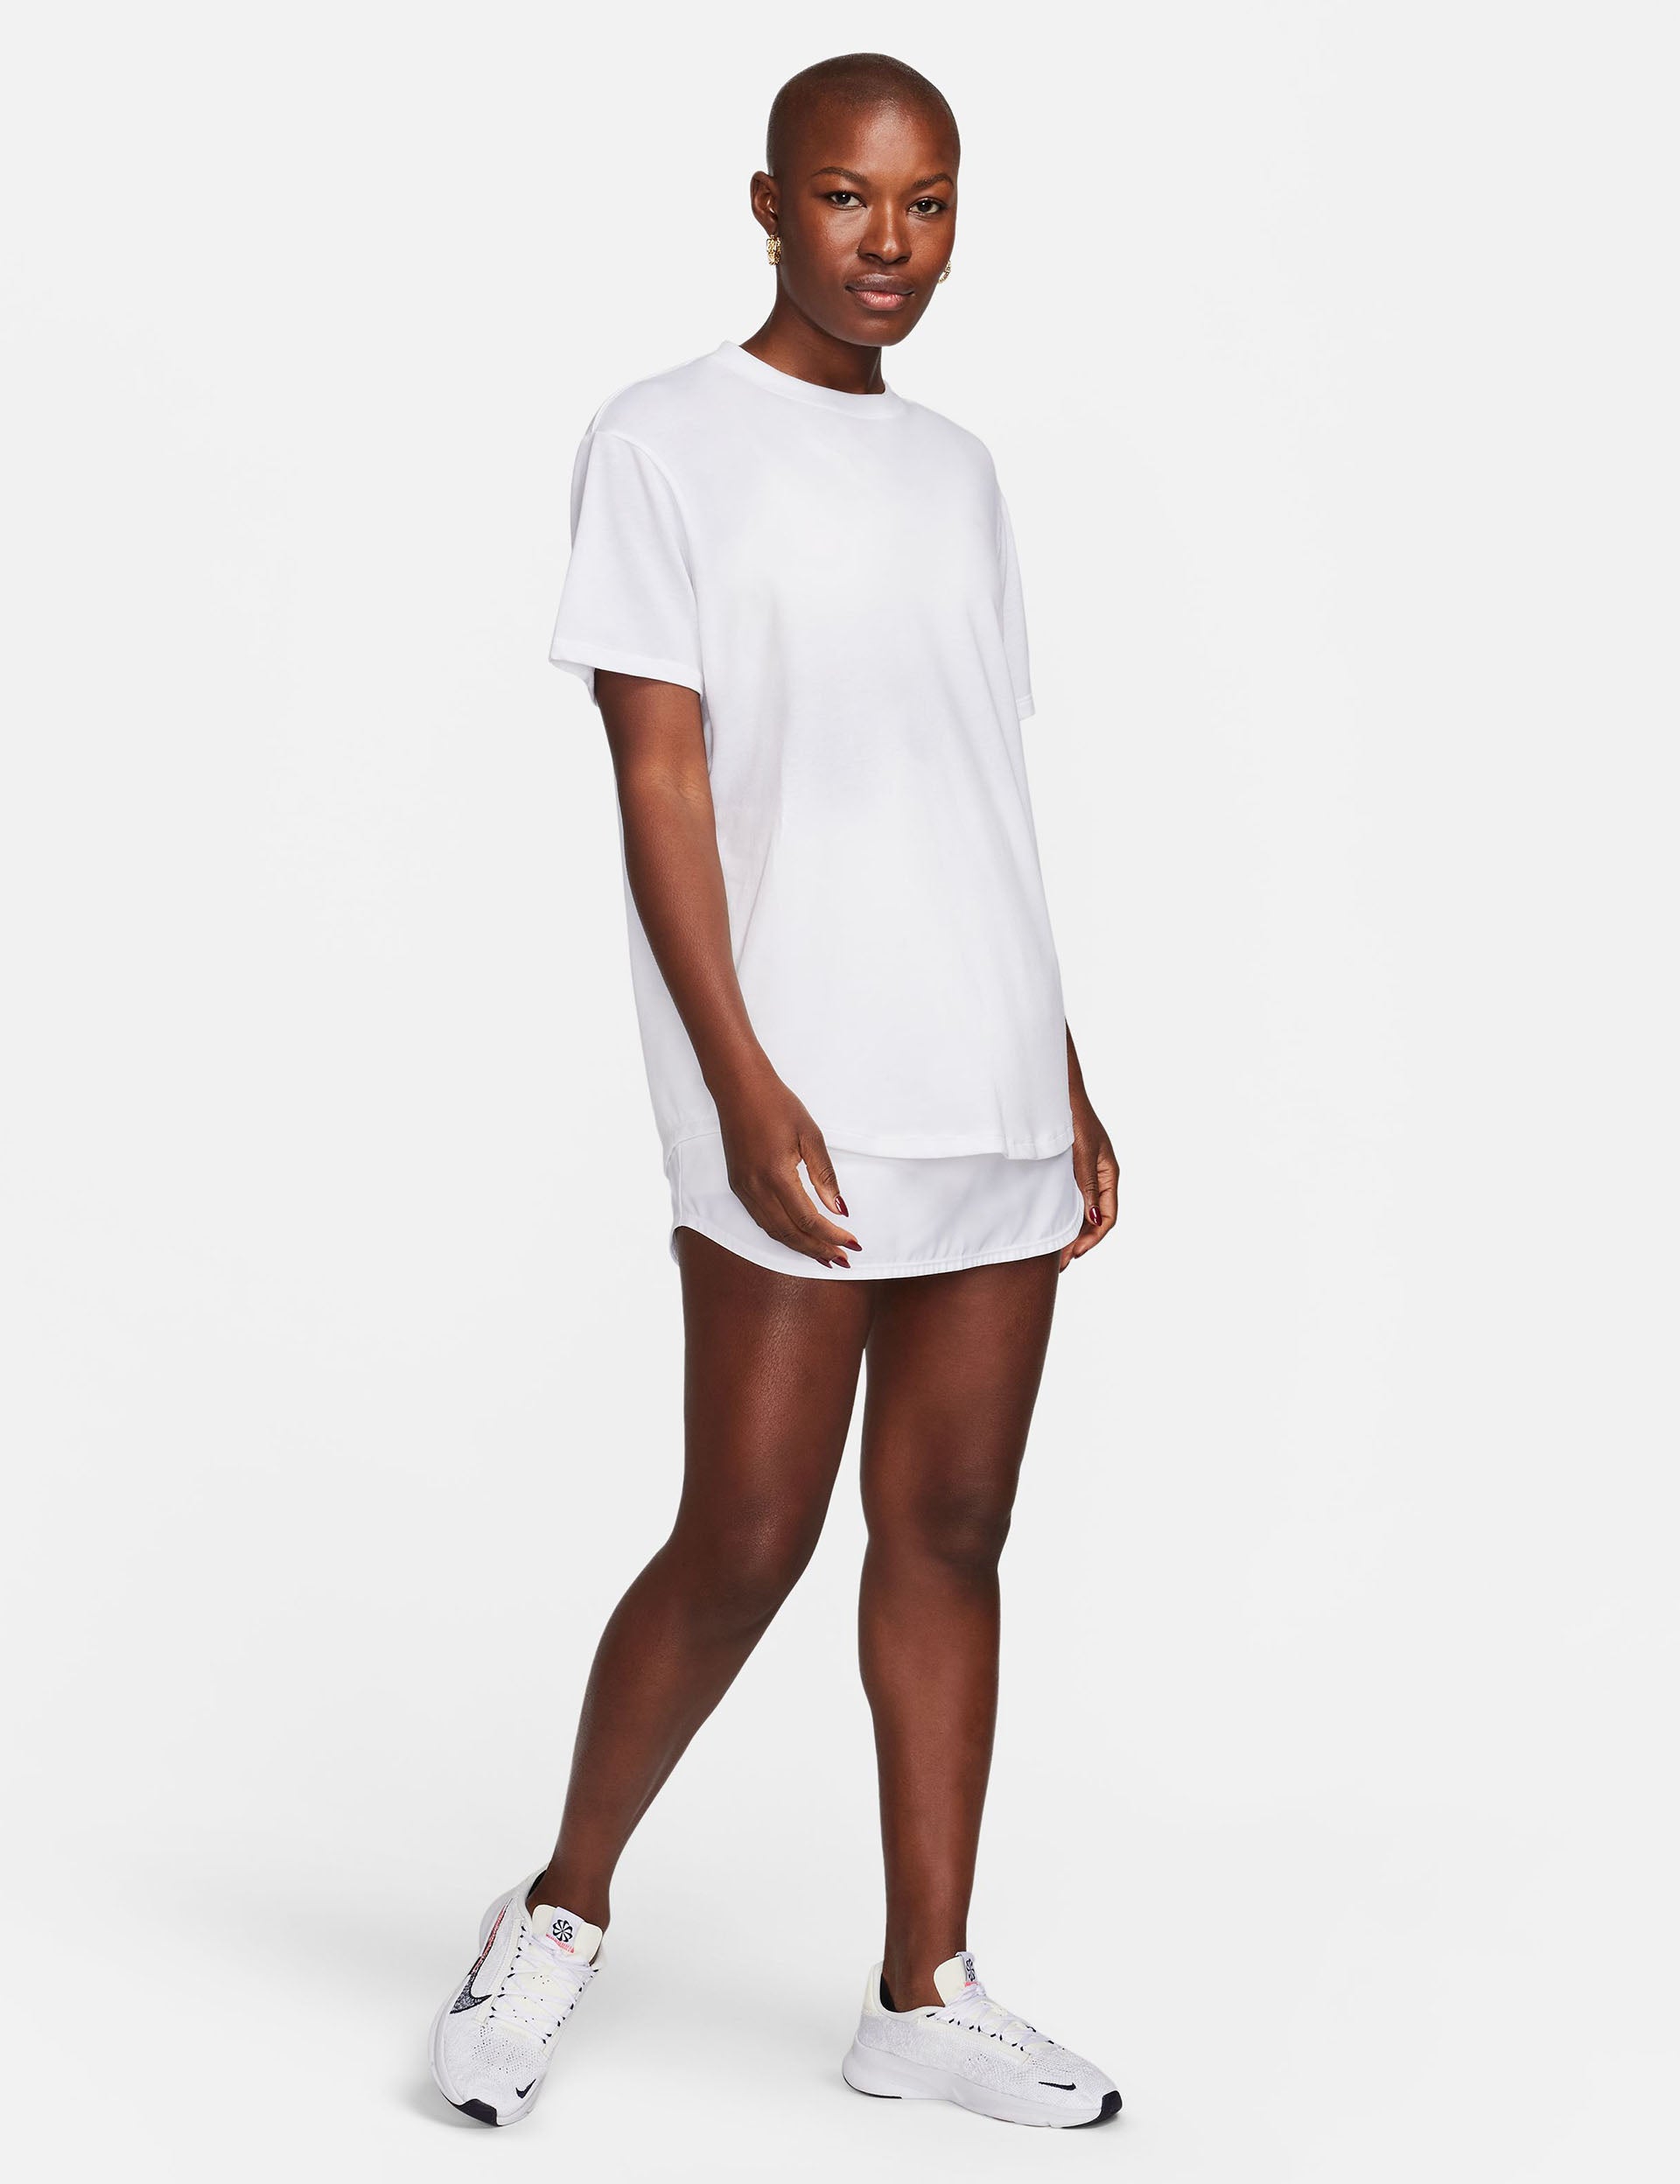 Nike, One Relaxed Dri-FIT Short-Sleeve Top - White